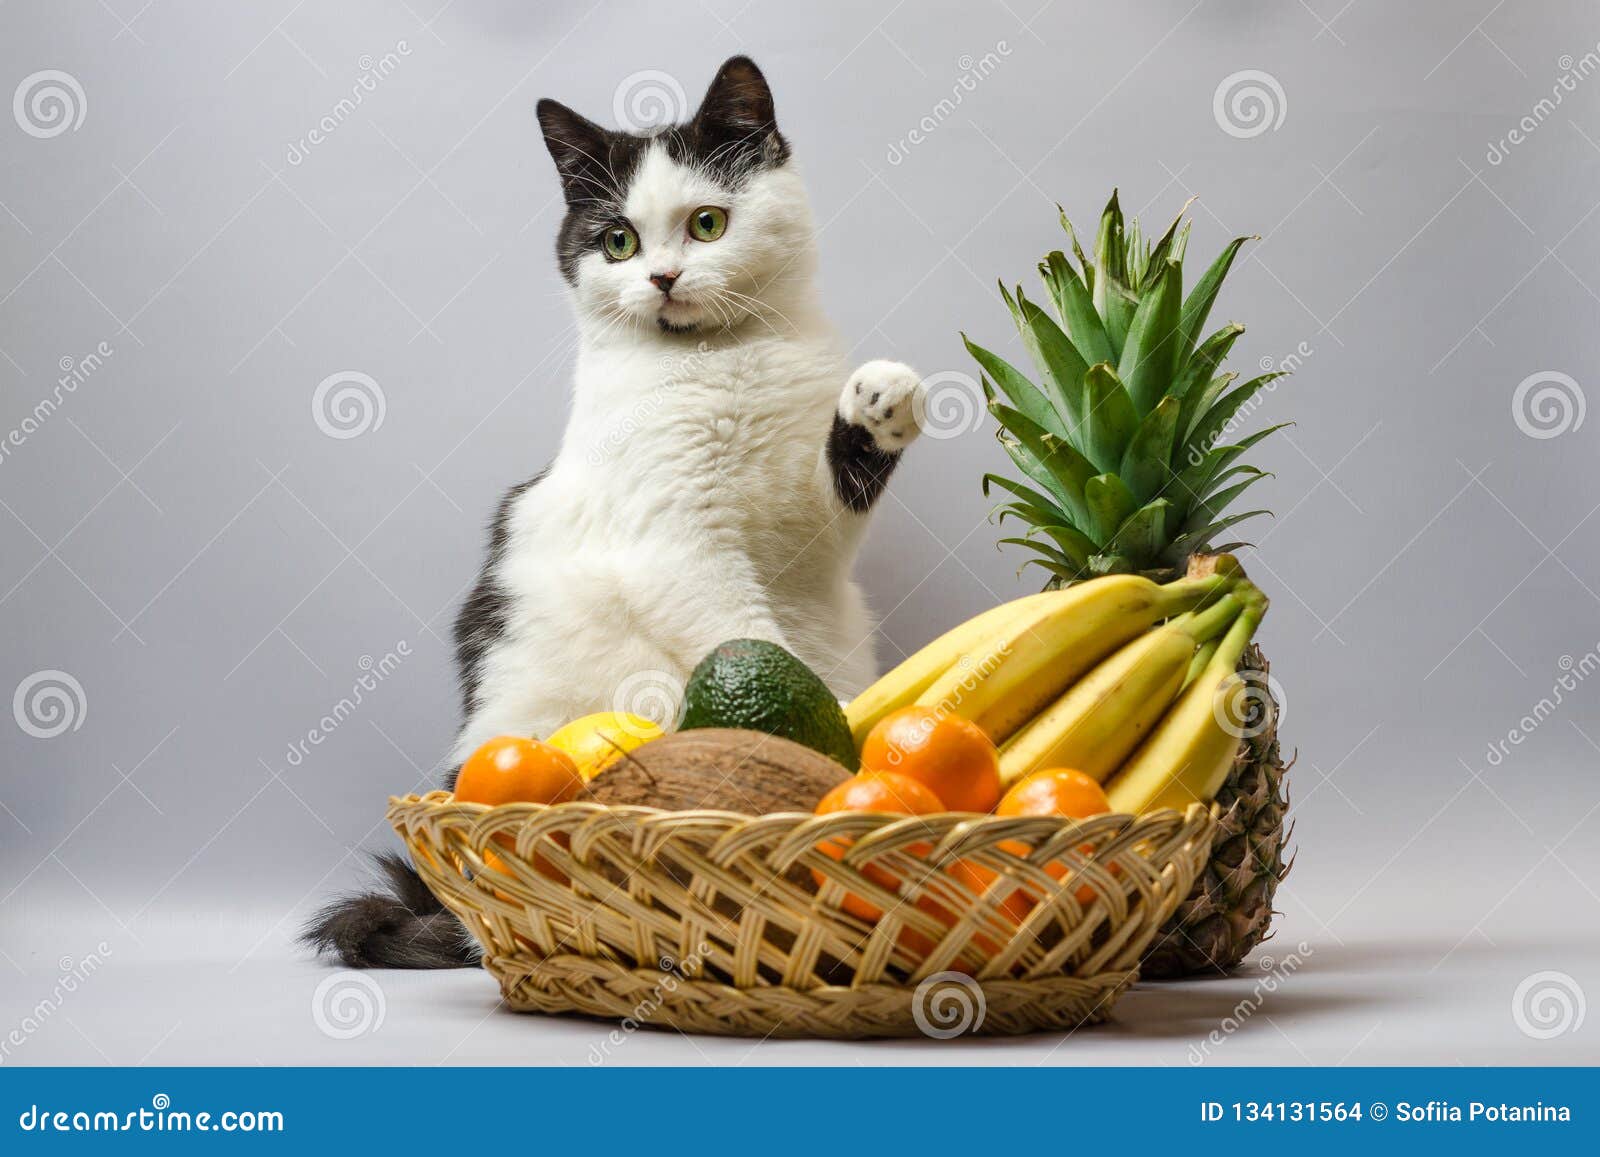 Black and White Fat Cat Raised a Paw Over a Basket of Tropical Fruits ...